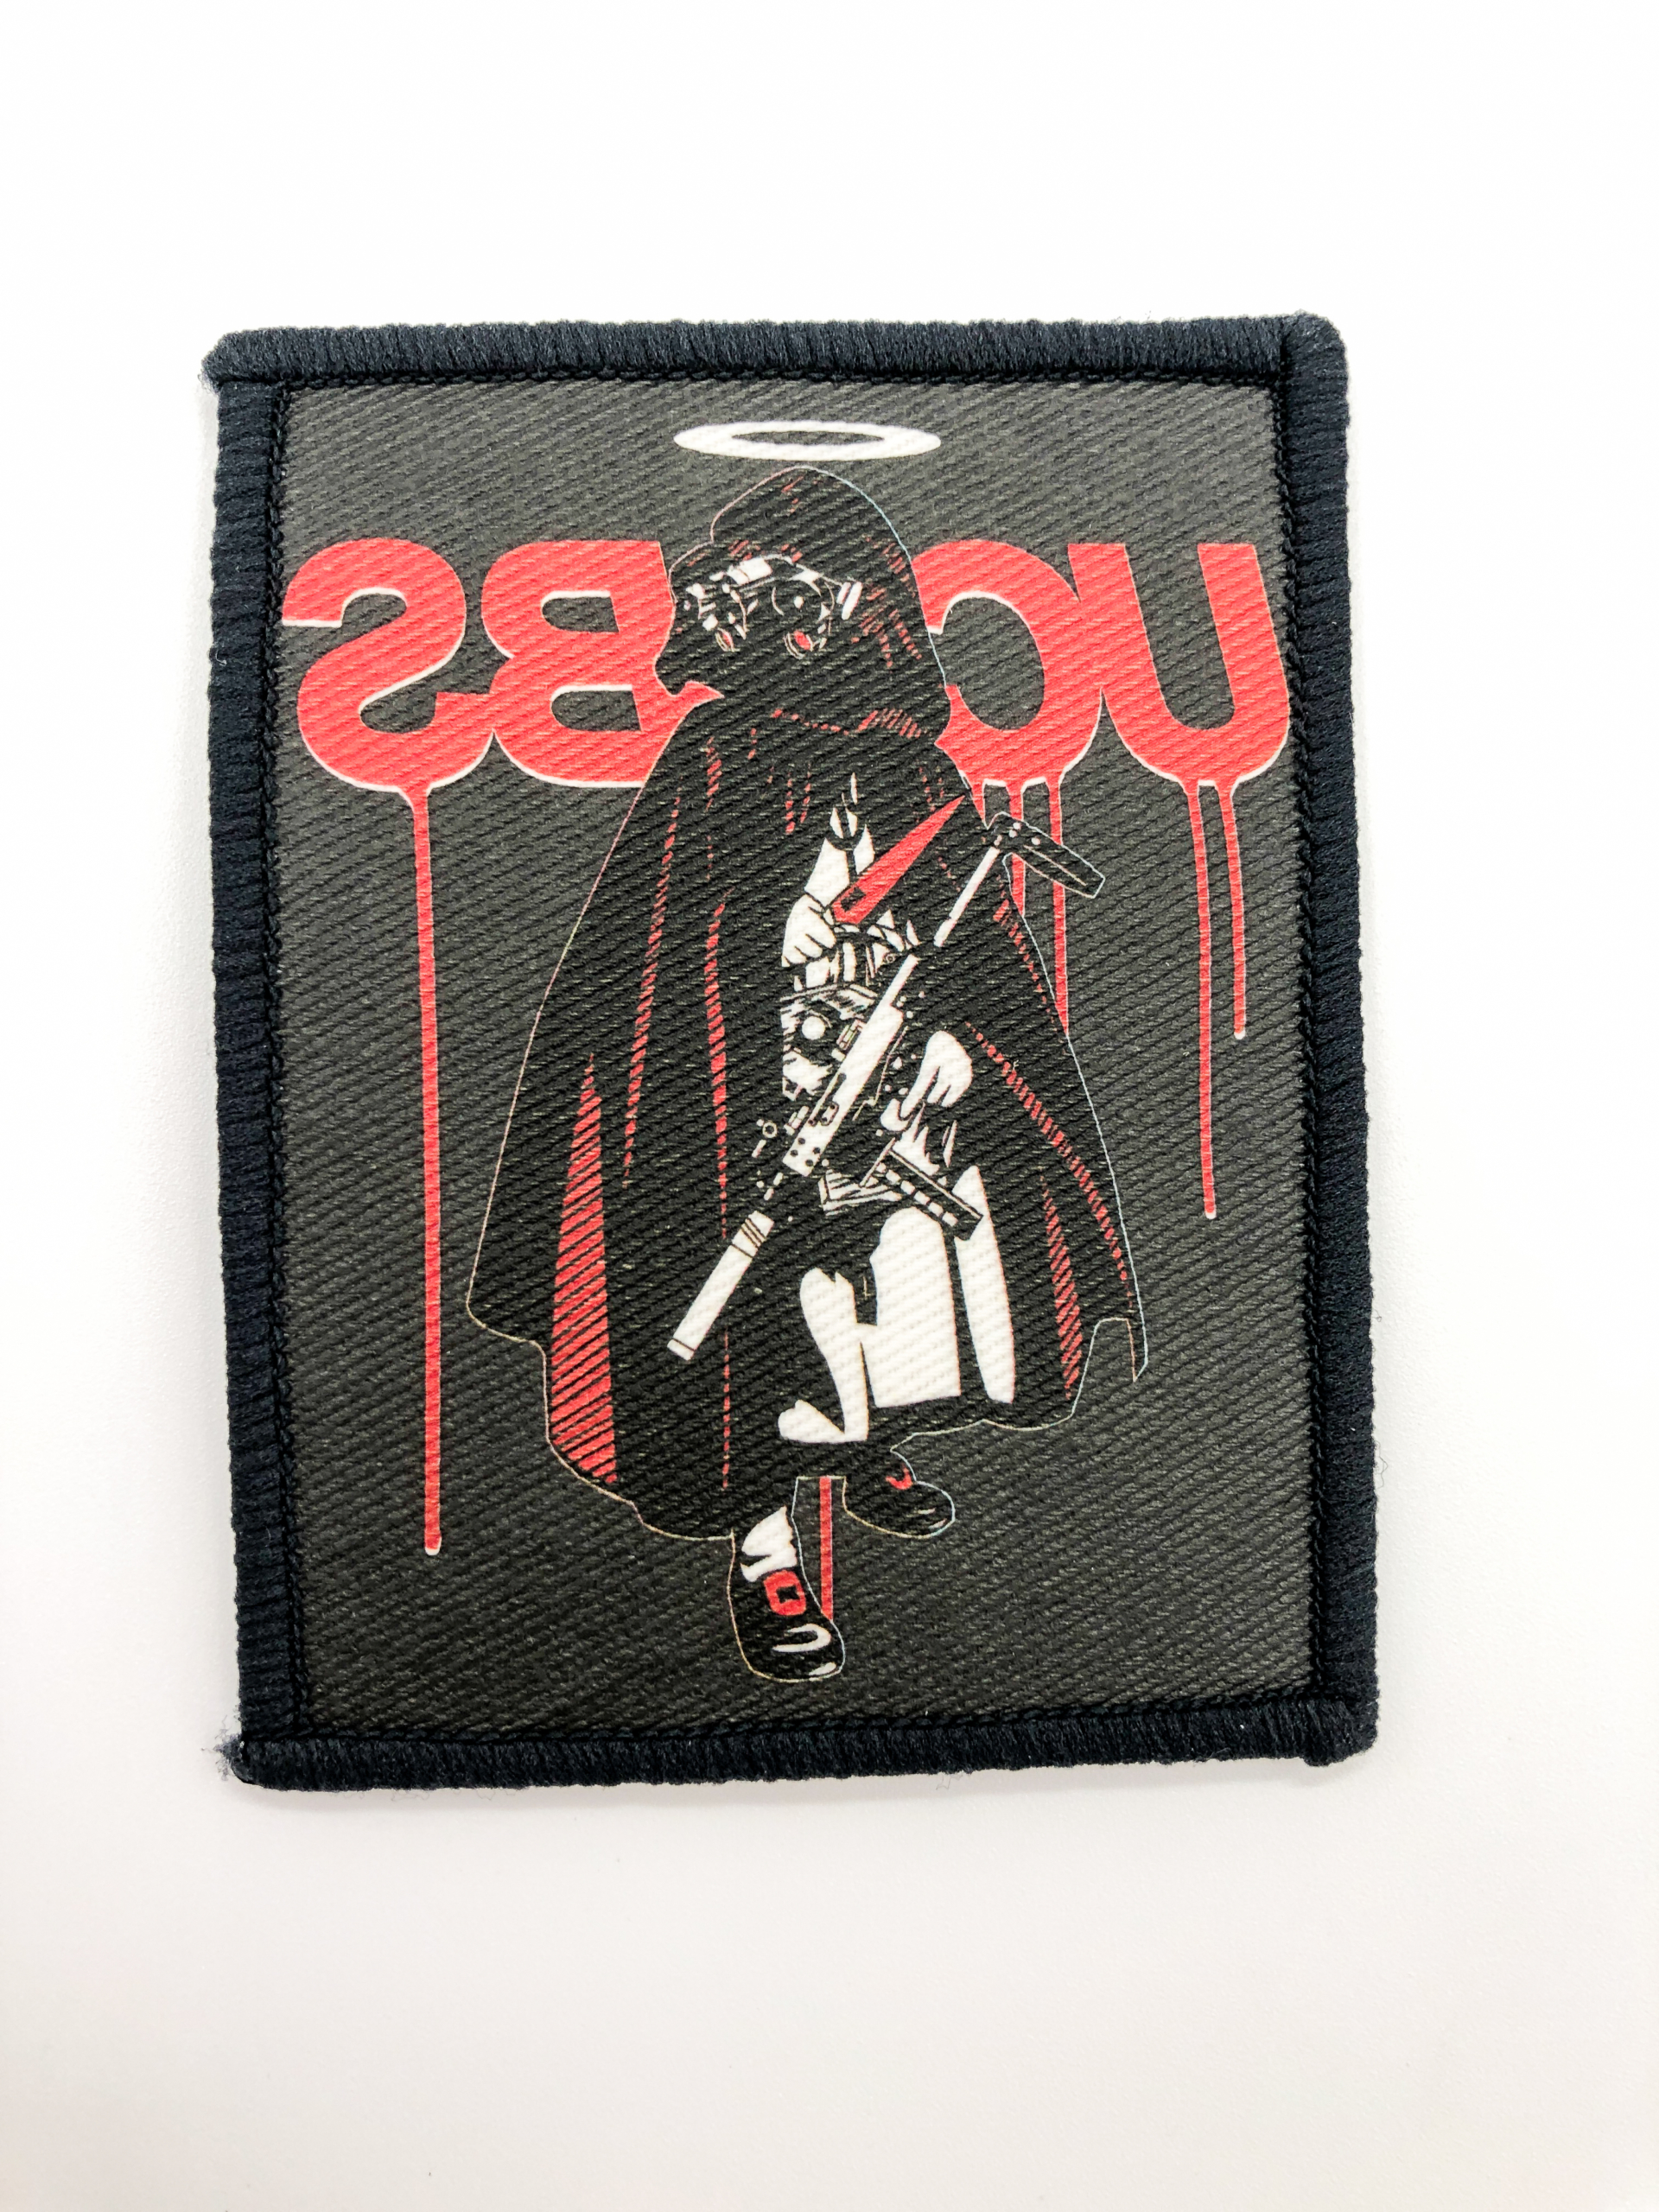 UCQBS-2022WS 10 Patch